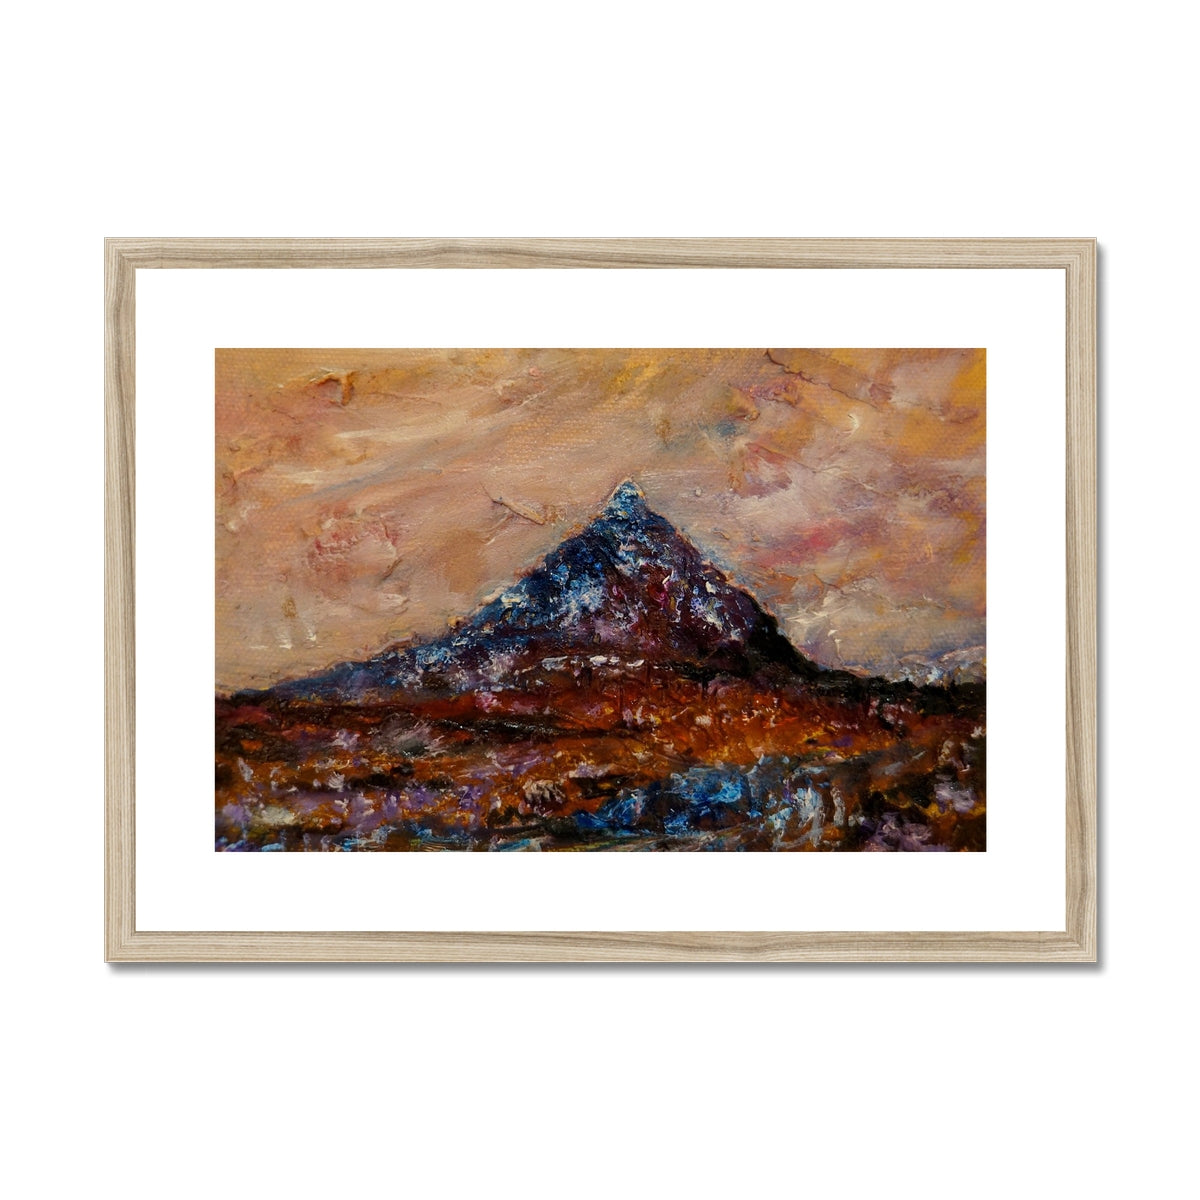 Buachaille Etive Mòr Painting | Framed & Mounted Prints From Scotland-Framed & Mounted Prints-Glencoe Art Gallery-A2 Landscape-Natural Frame-Paintings, Prints, Homeware, Art Gifts From Scotland By Scottish Artist Kevin Hunter